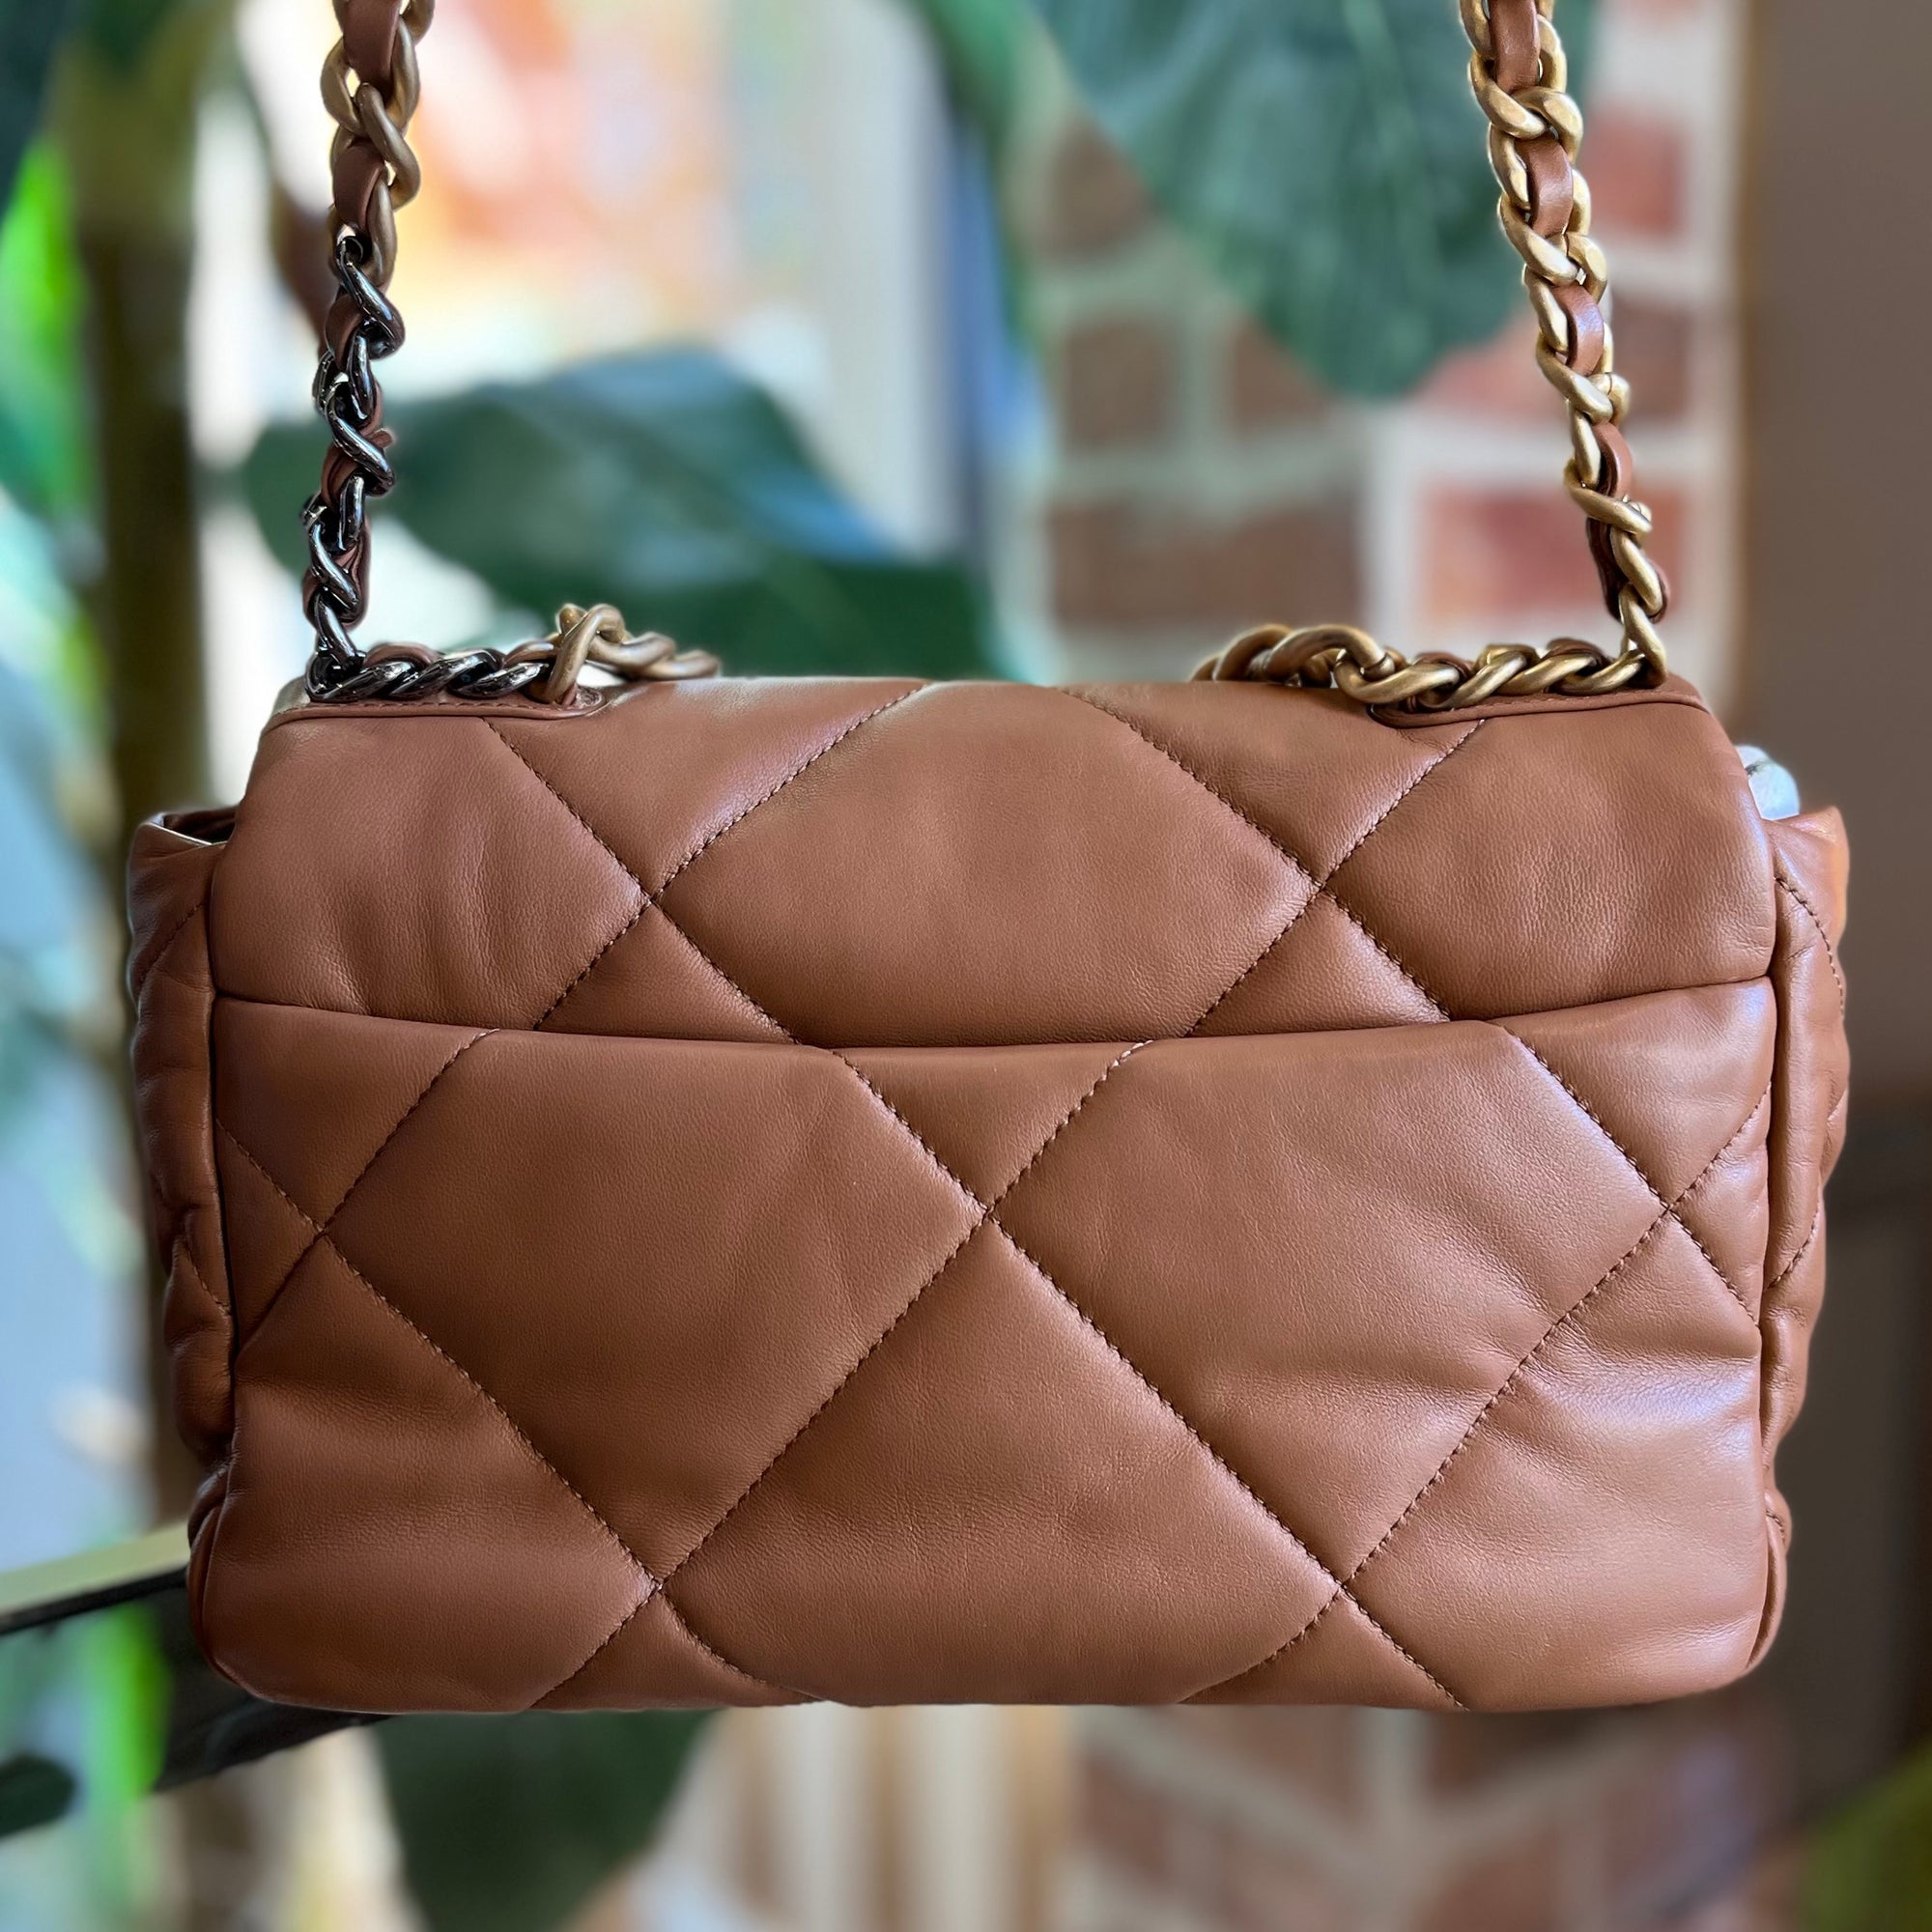 CHANEL Brown Lambskin Quilted Medium 19 Flap